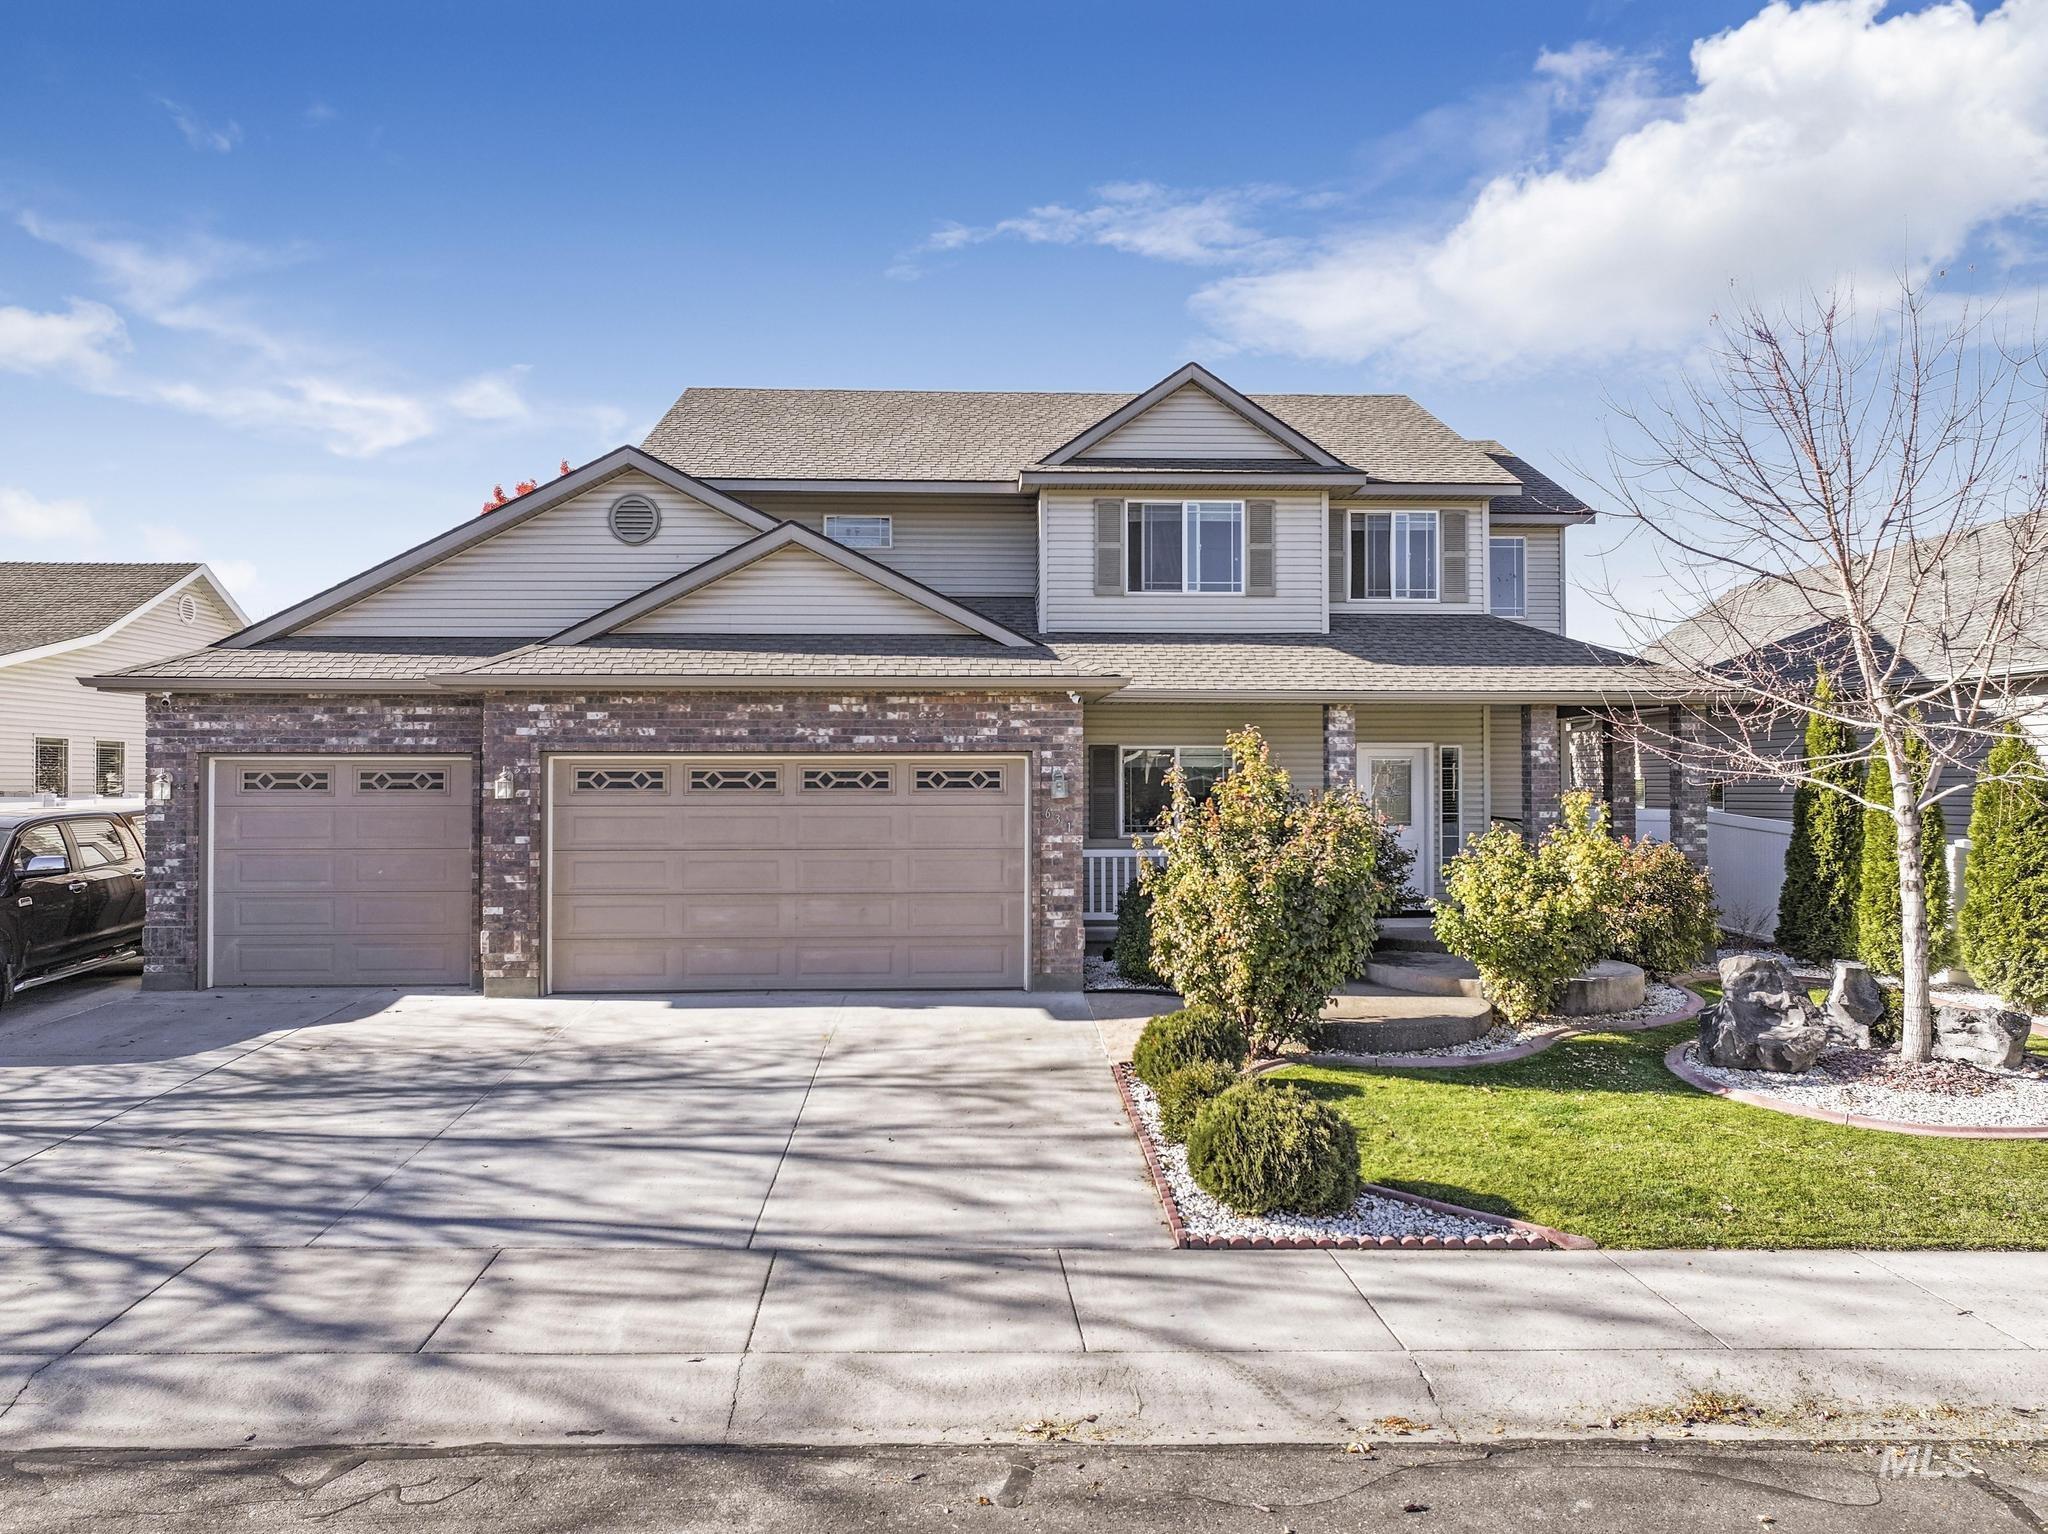 631 Sunbeam Dr., Twin Falls, Idaho 83301, 5 Bedrooms, 3.5 Bathrooms, Residential For Sale, Price $620,000,MLS 98895243